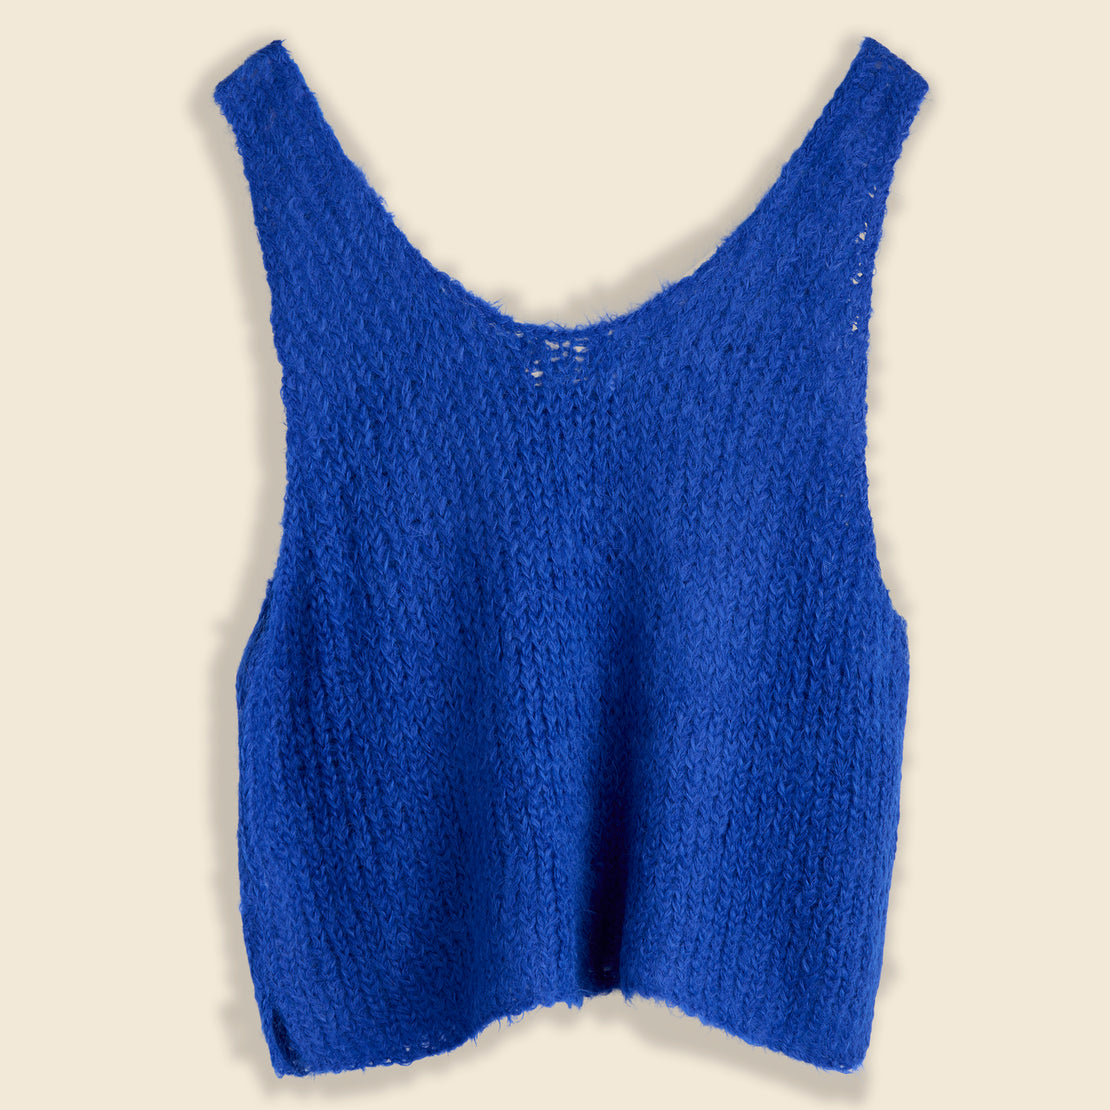 Sweater Tank - Royal Blue - Atelier Delphine - STAG Provisions - W - Tops - Sleeveless